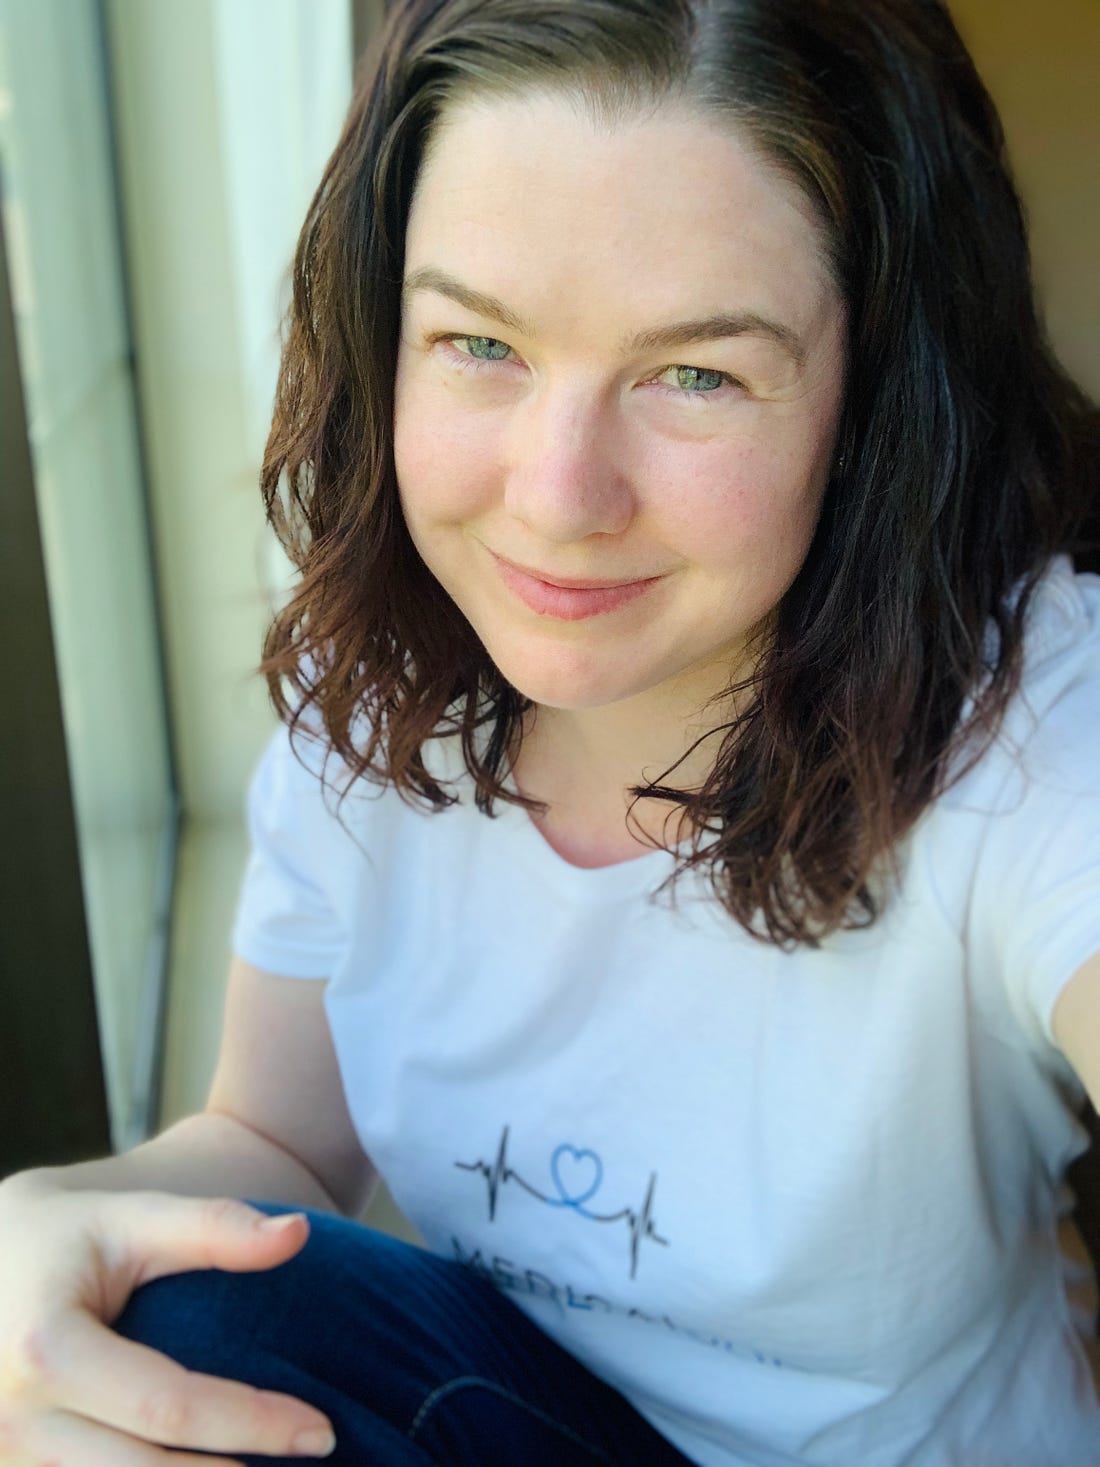 Shasta Kearns Moore, a brown-haired, blue-eyed white woman smiles at the camera wearing a white T-shirt with the Medical Motherhood logo and blue jeans.